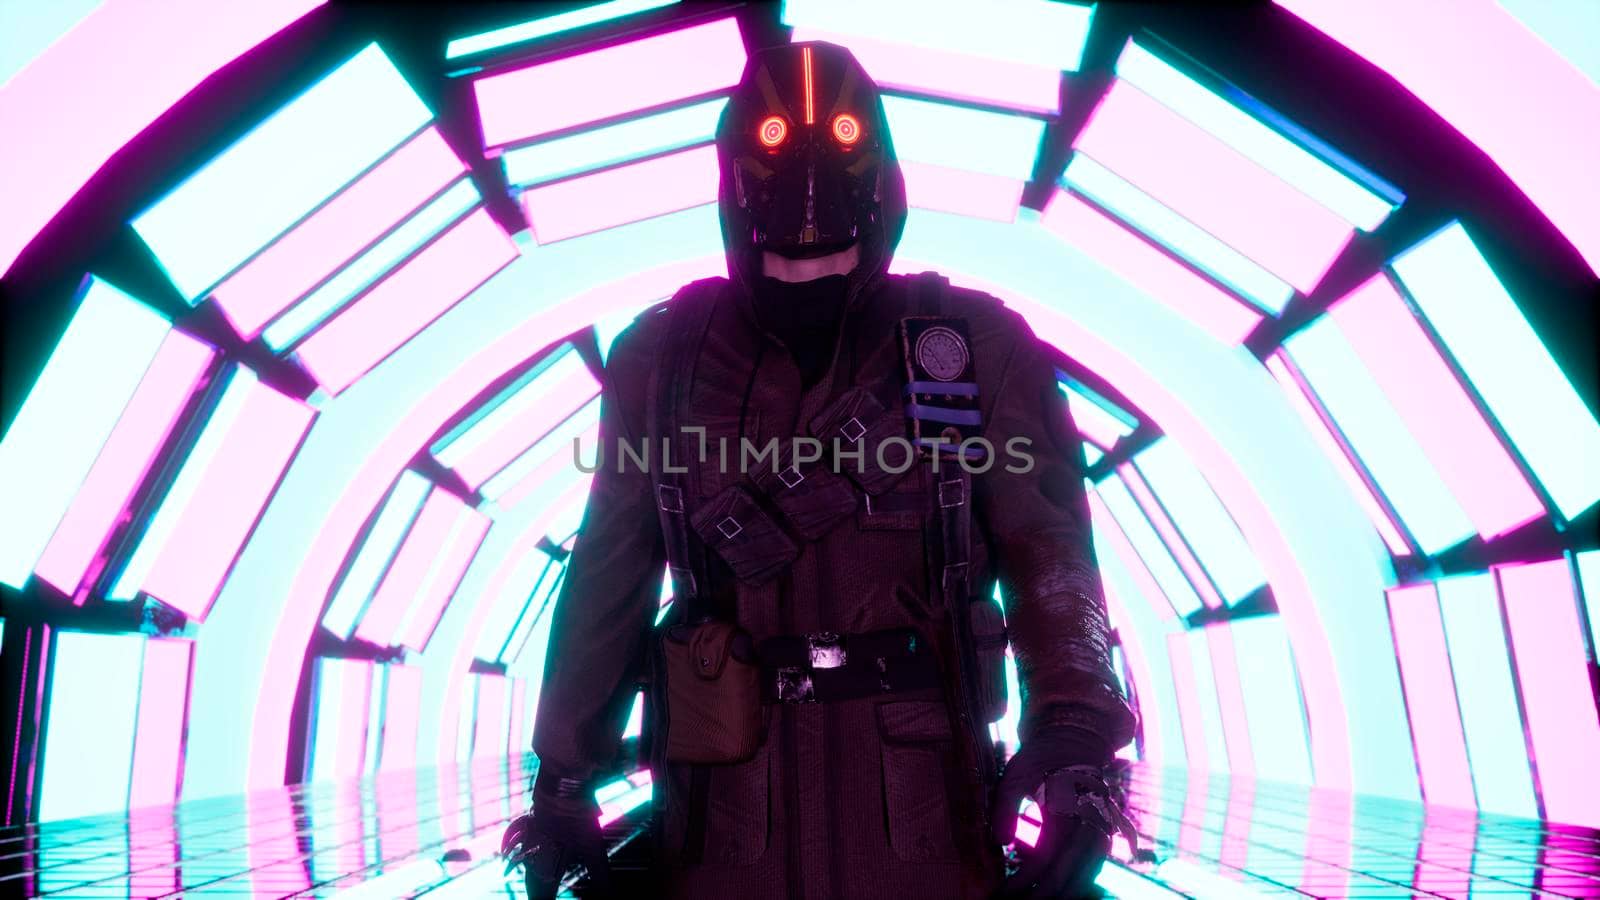 A surviving stalker walks through a glowing neon tunnel. View of the glowing neon corridor.